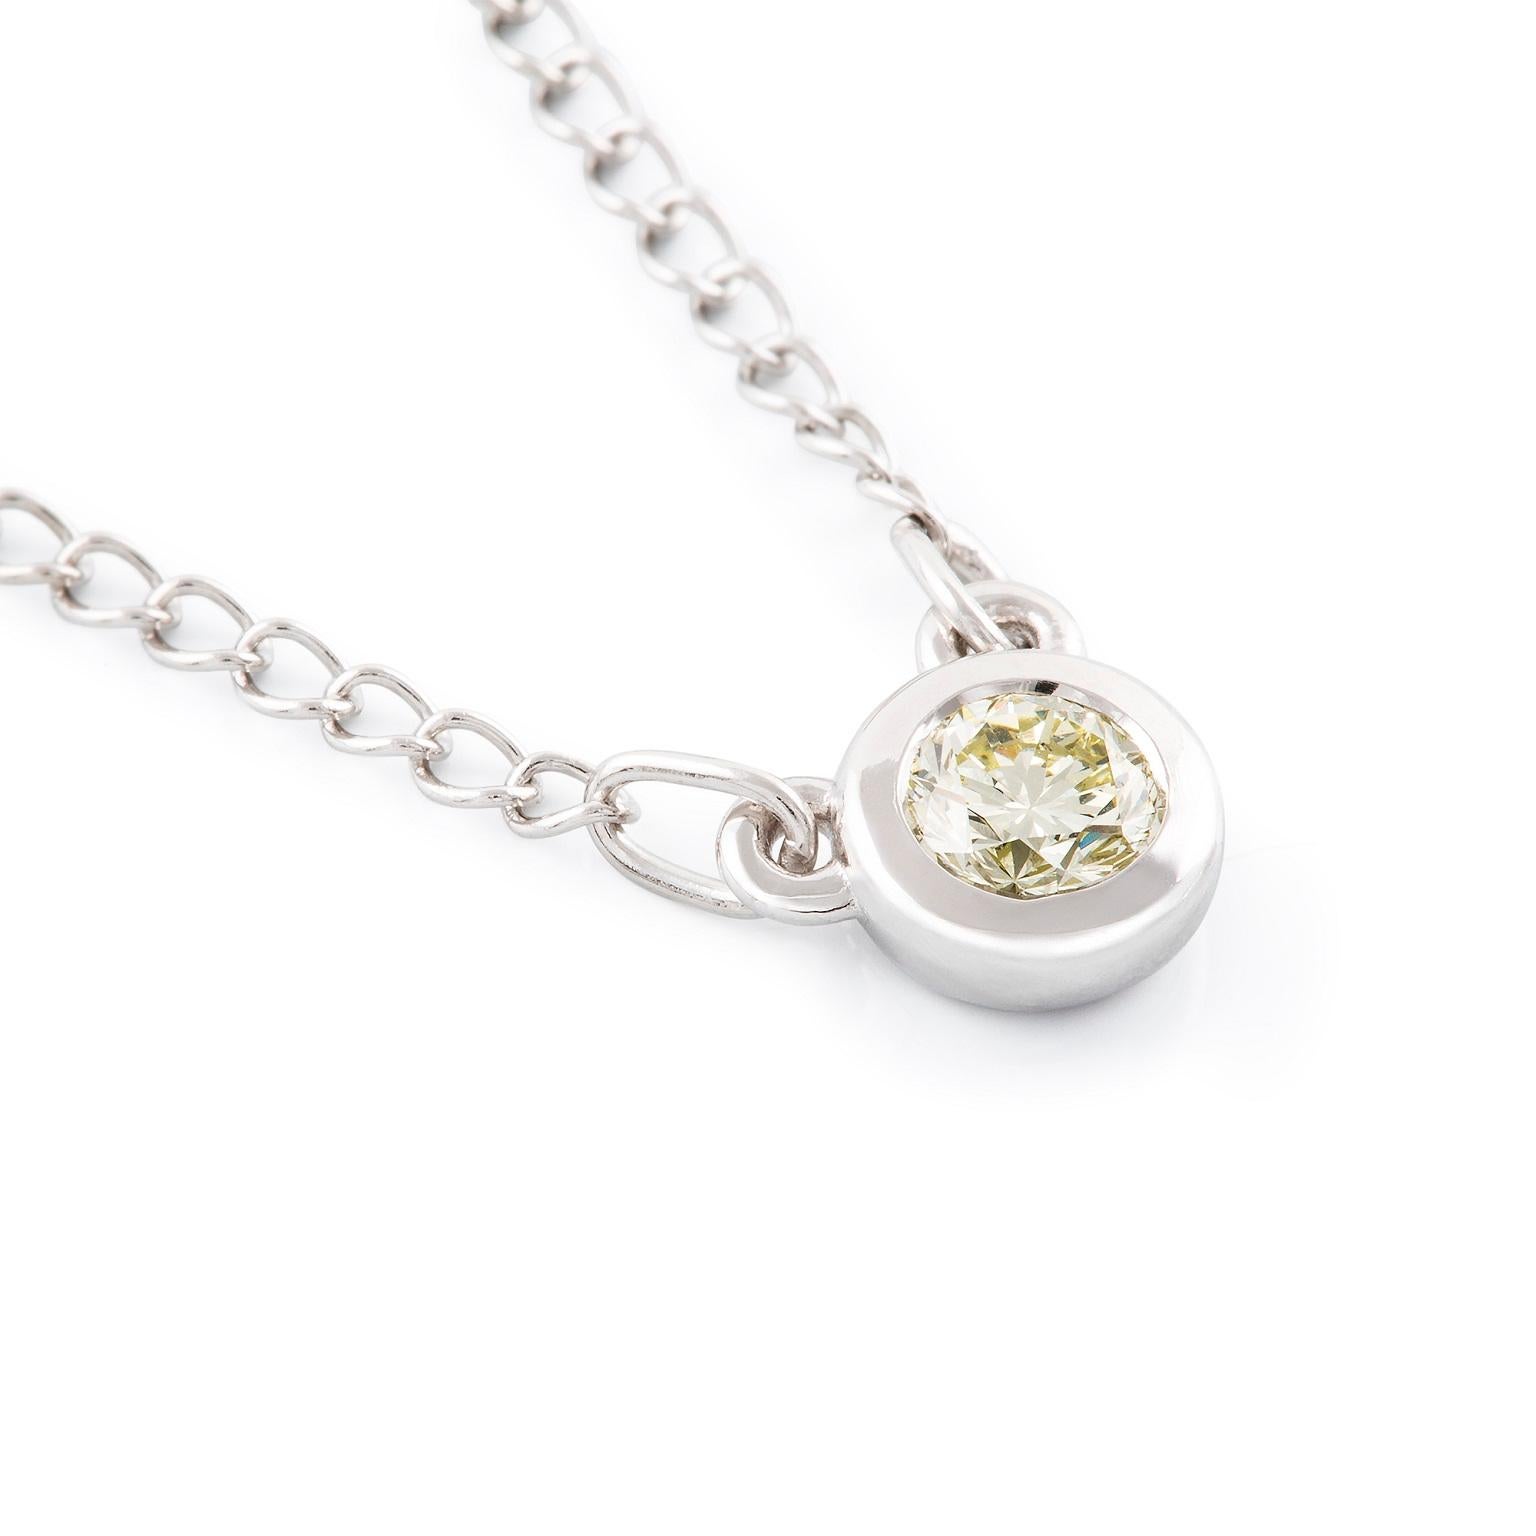 Diamond Necklace

This gorgeous petite pendant features a stunning  diamond. The circular setting is suspended from an elegant curb chain.

Round brilliant cut diamonds:Fancy Yellow color, SI clarity, 0.40 Carat diamond weigh

Weight: 3.60